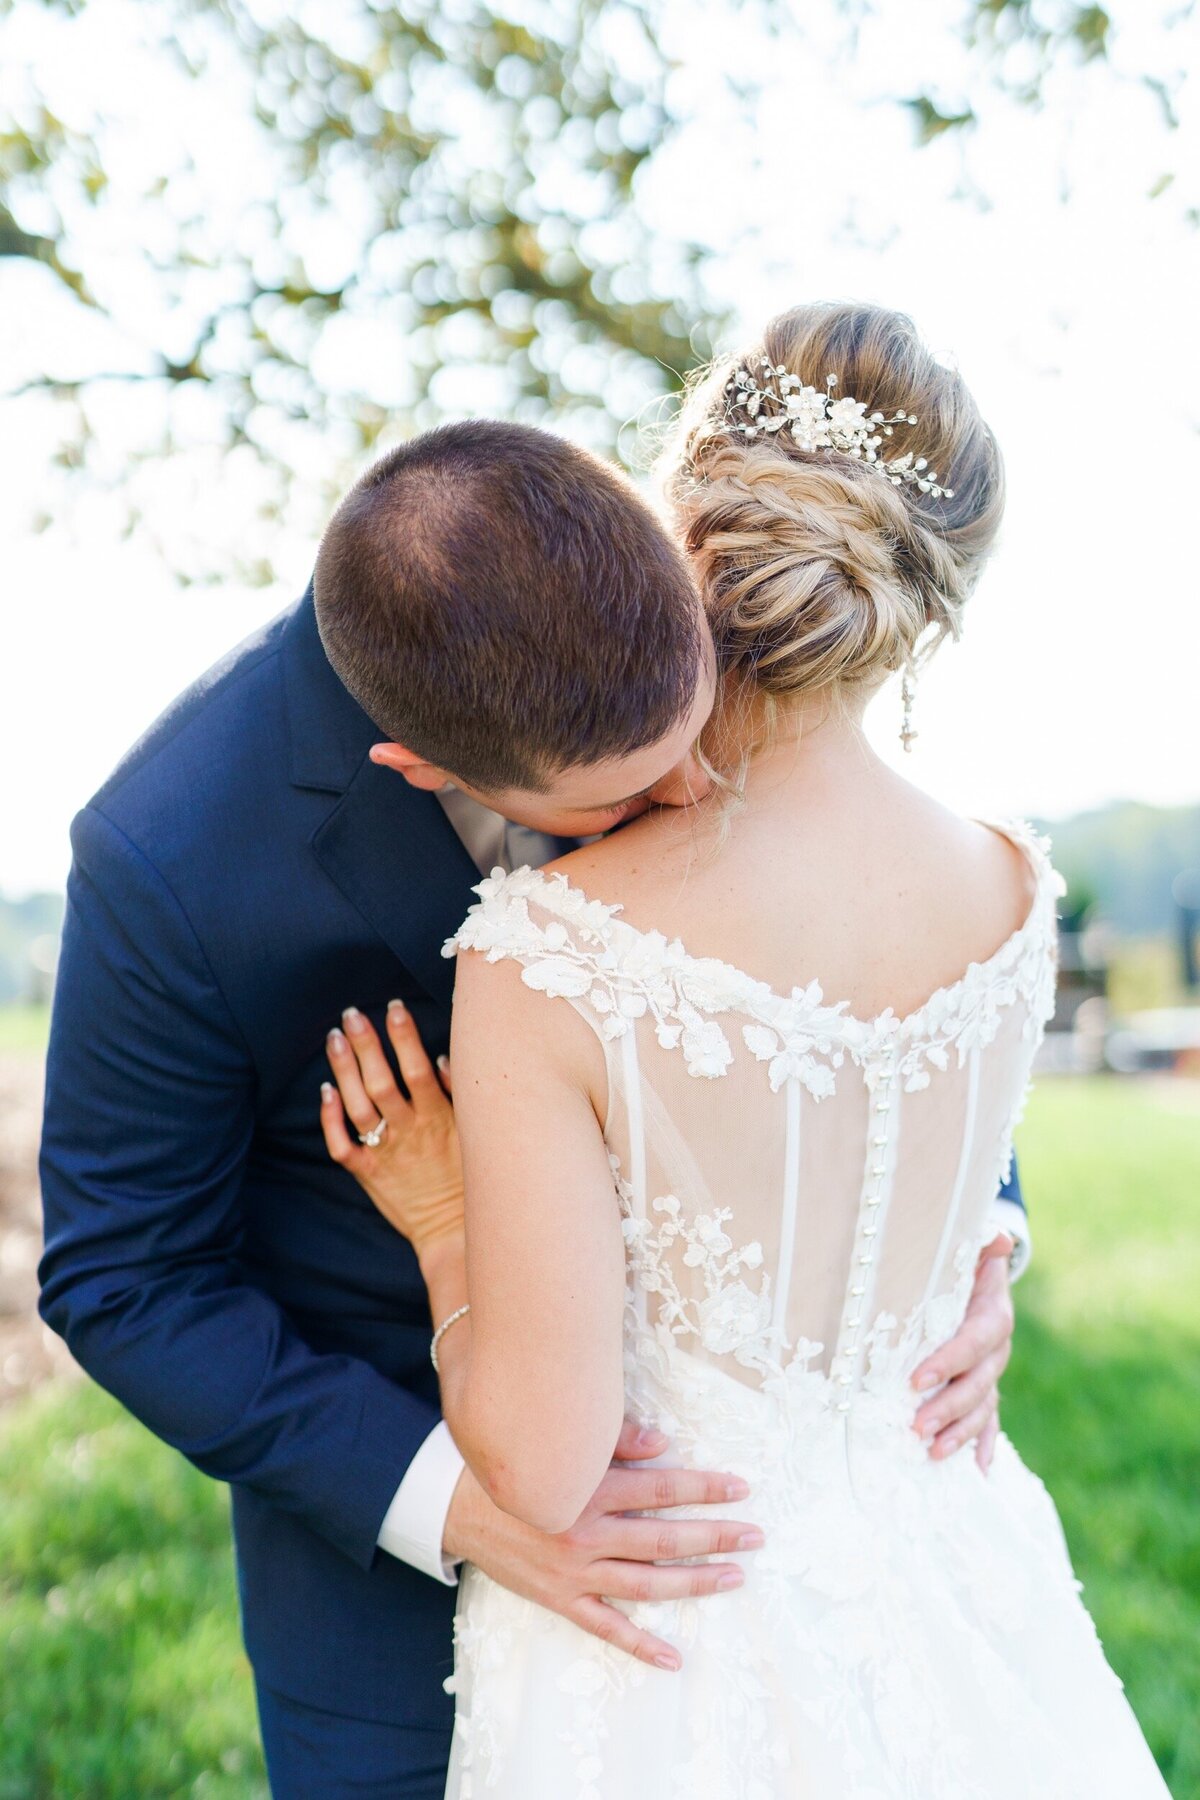 A groom kisses his bride on the neck as she snuggles into his chest at their vineyard wedding near Charlotte, NC.